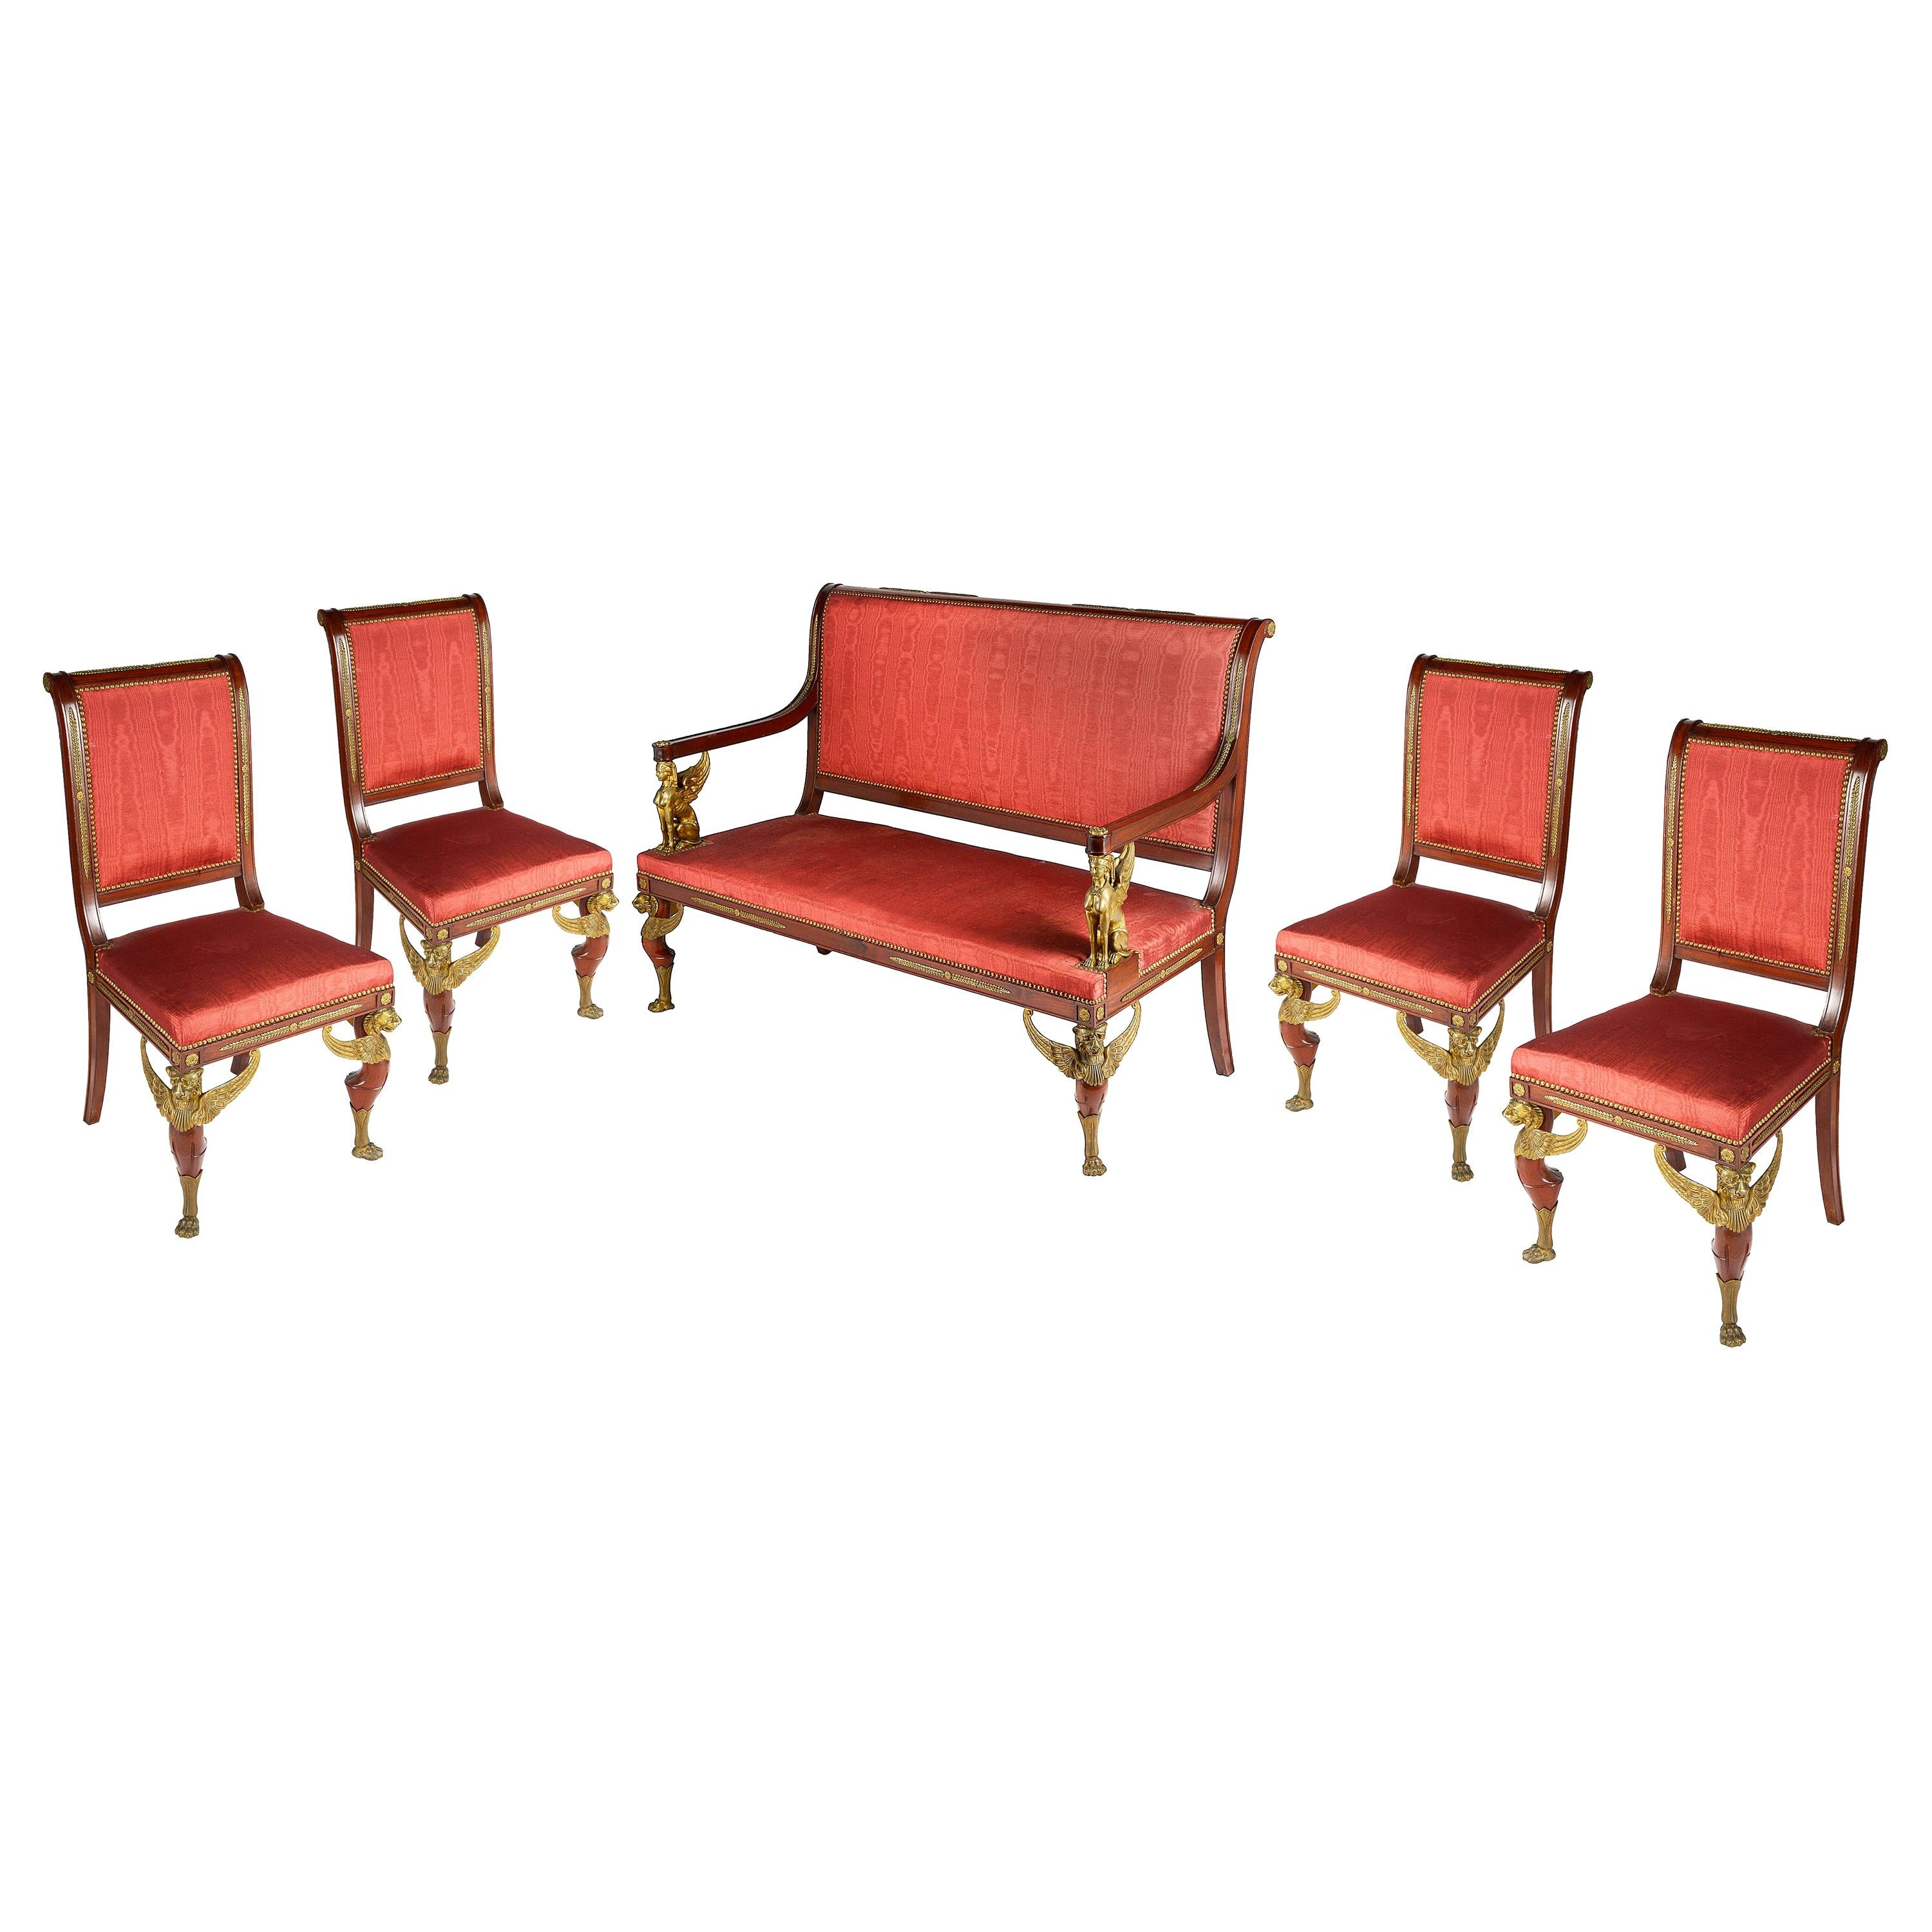 A good quality late 19th century French mahogany Empire influenced three piece salon suite, consisting on a two-seat sofa and two side chairs, each with gilded monopodia mounts.